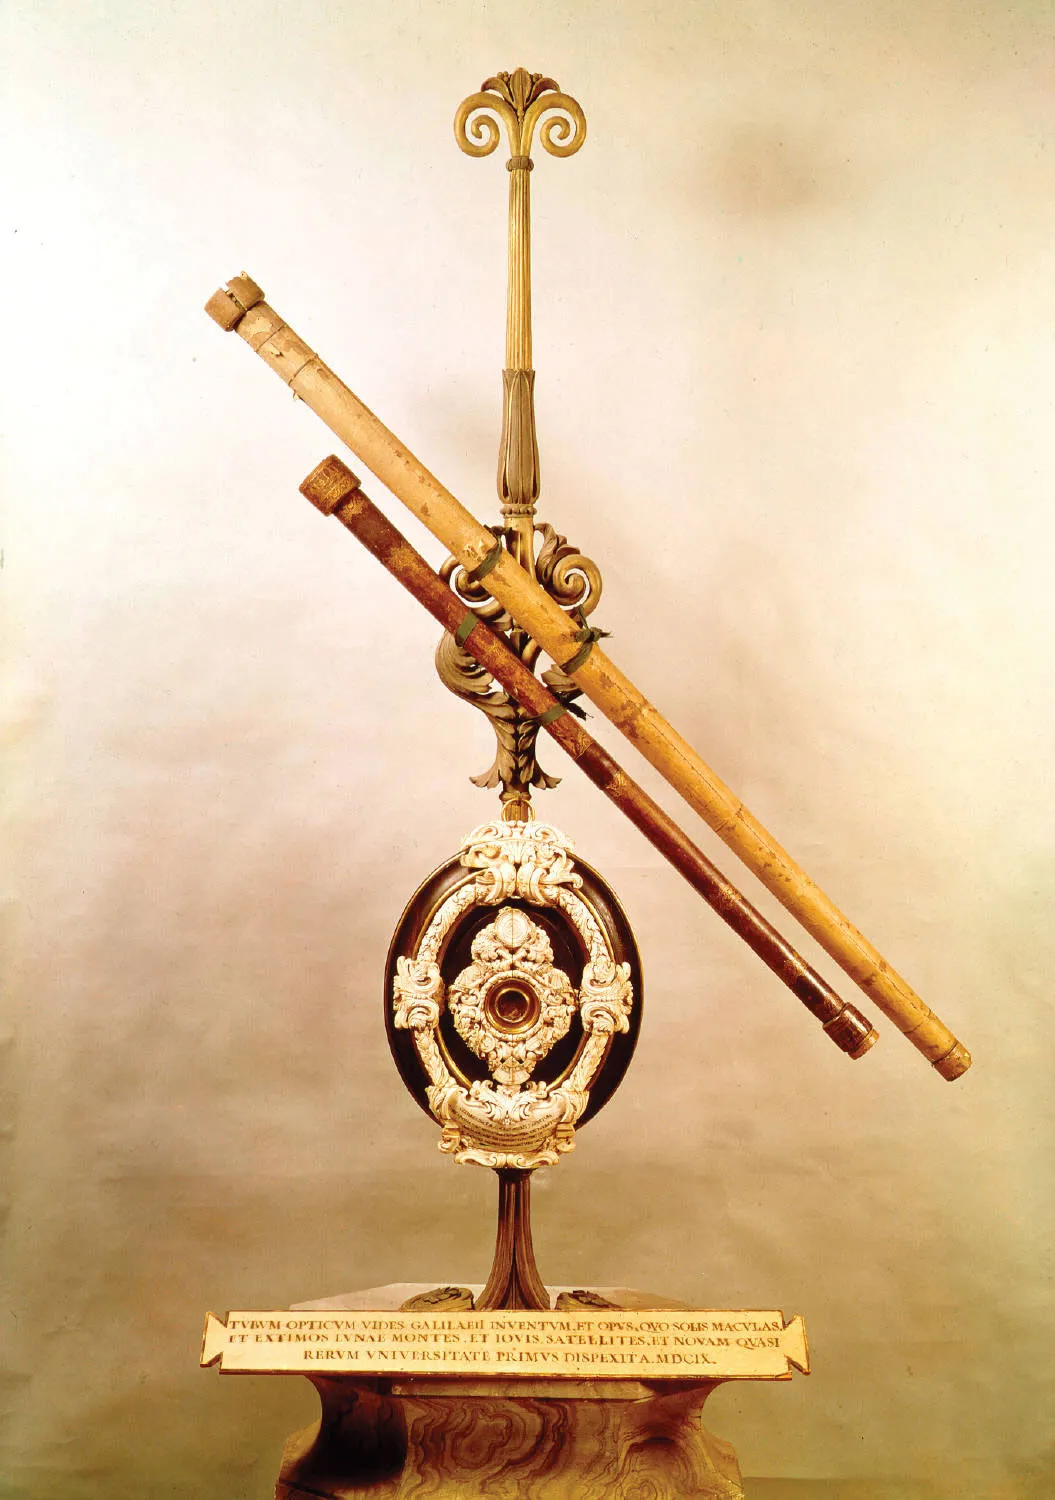 Two of Galileo's first telescopes; in the Museo Galileo, Florence